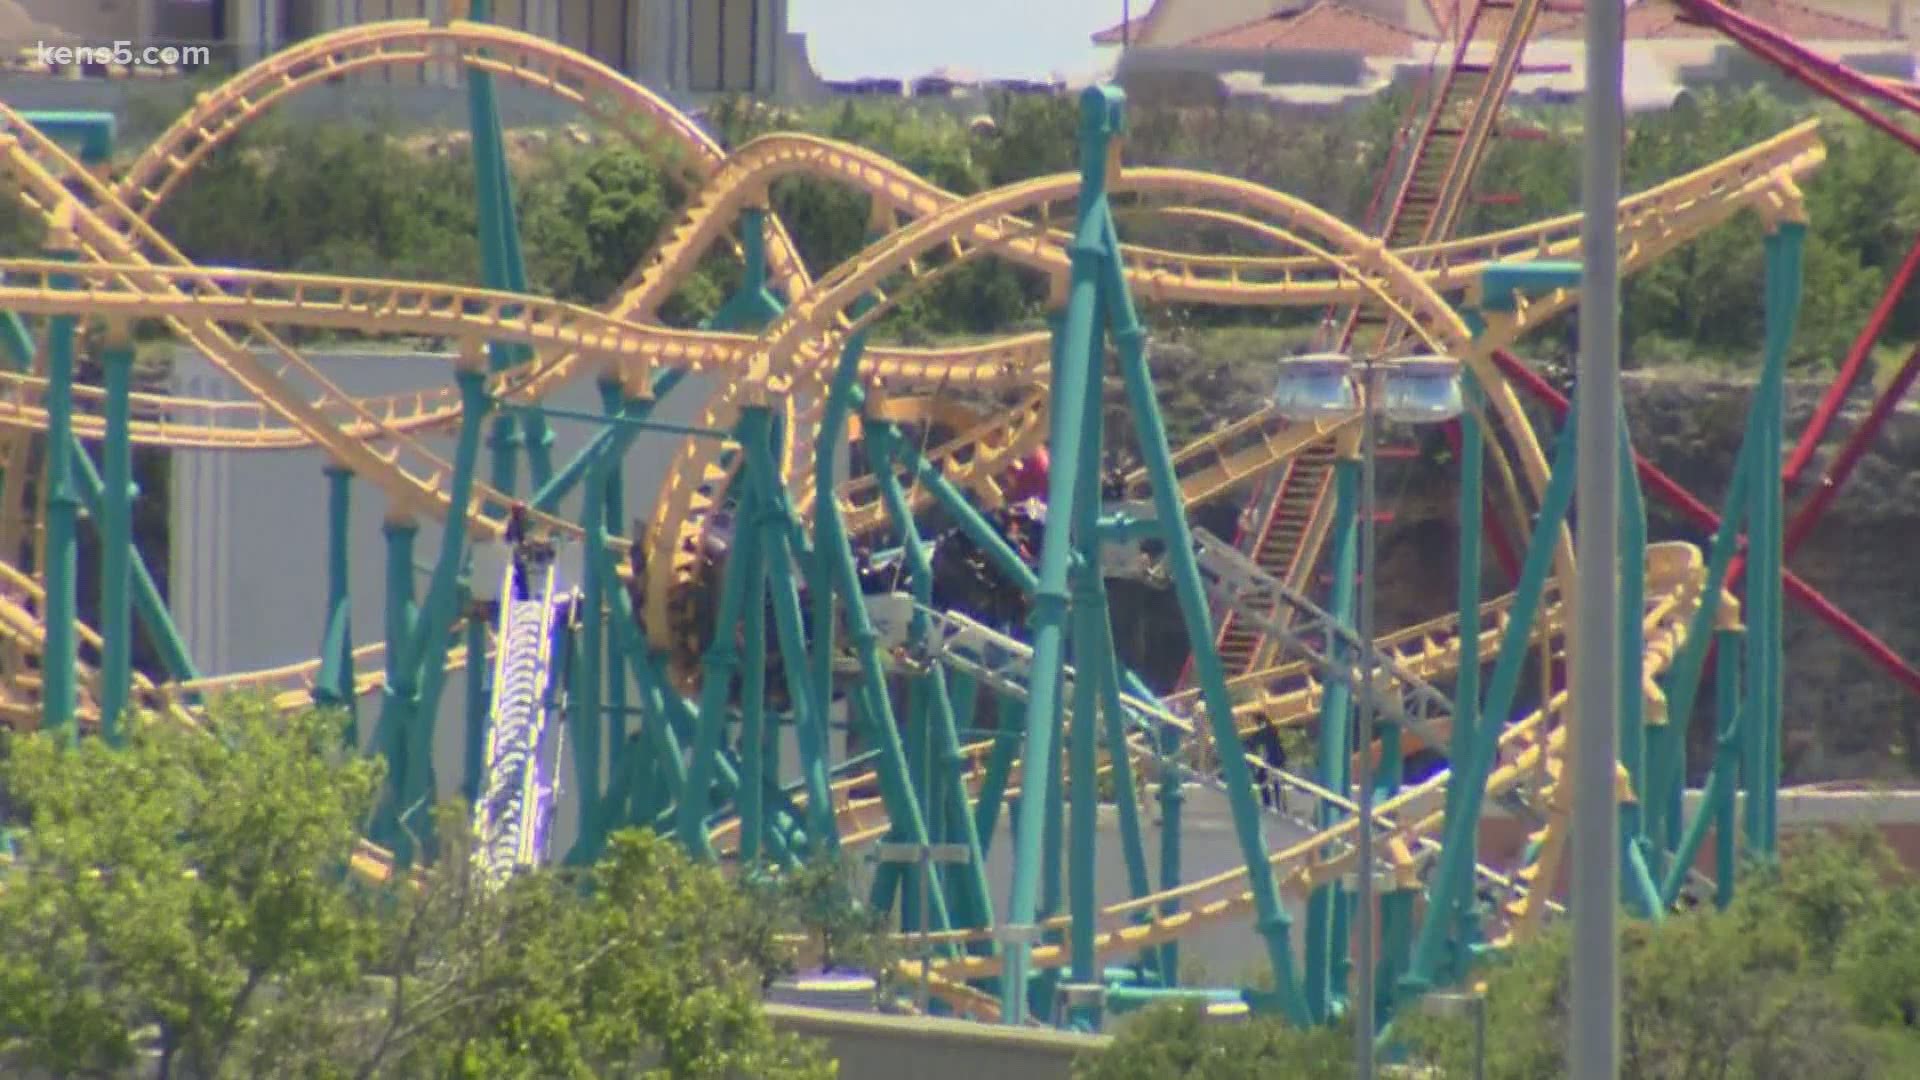 20 Six Flags Fiesta Texas Customers Rescued From Stalled Rollercoaster